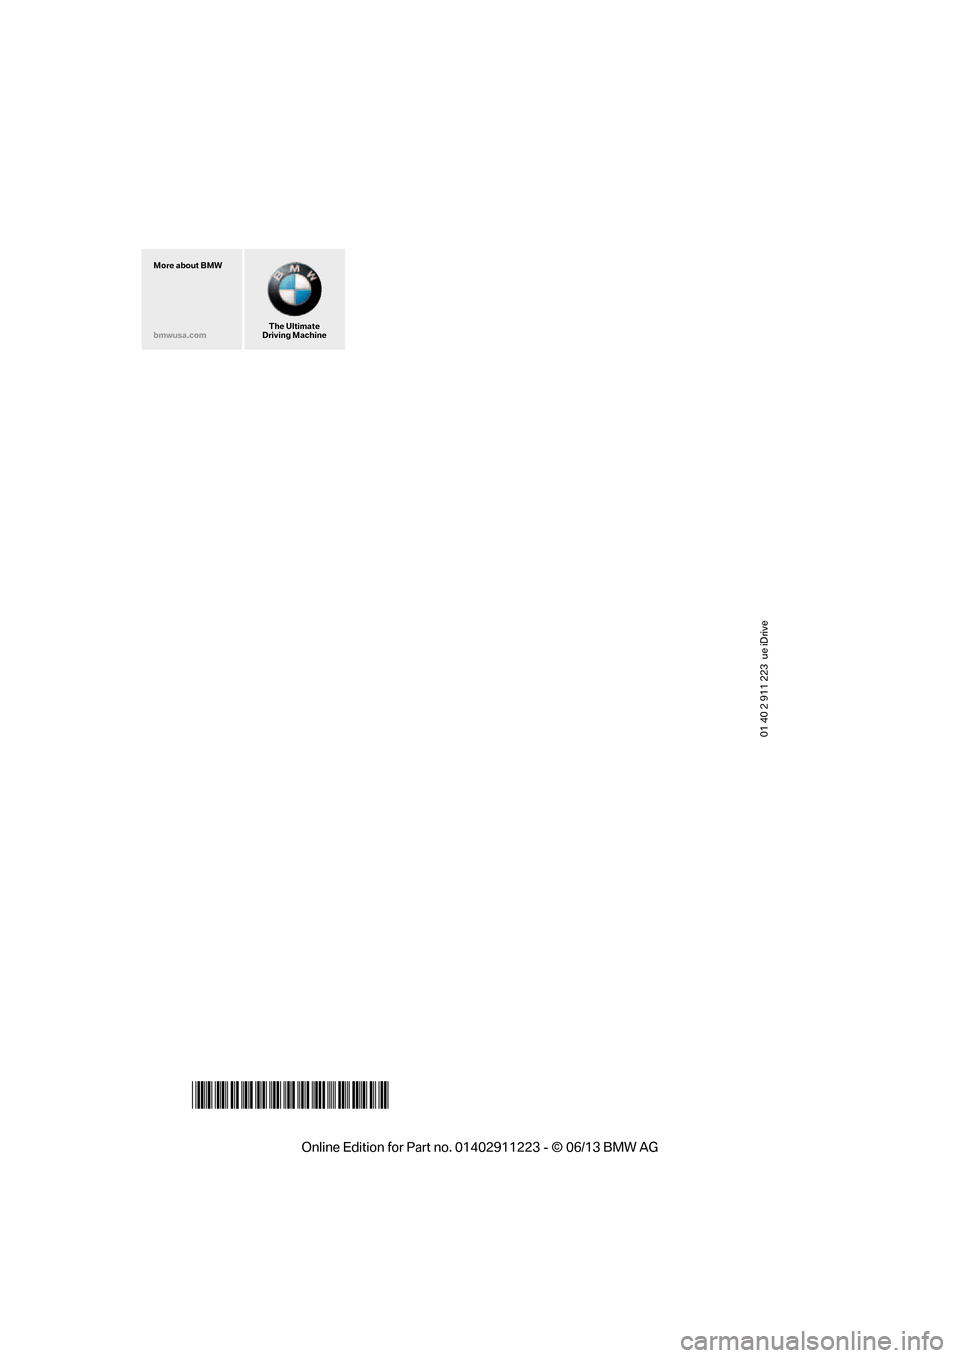 BMW 1 SERIES 2013 E82 Owners Manual 01 40 2 911 223  ue iDrive
*BL291122300I*
The Ultimate
Driving Machine
More about BMW
bmwusa.com

00320051004F004C00510048000300280047004C0057004C005200510003  